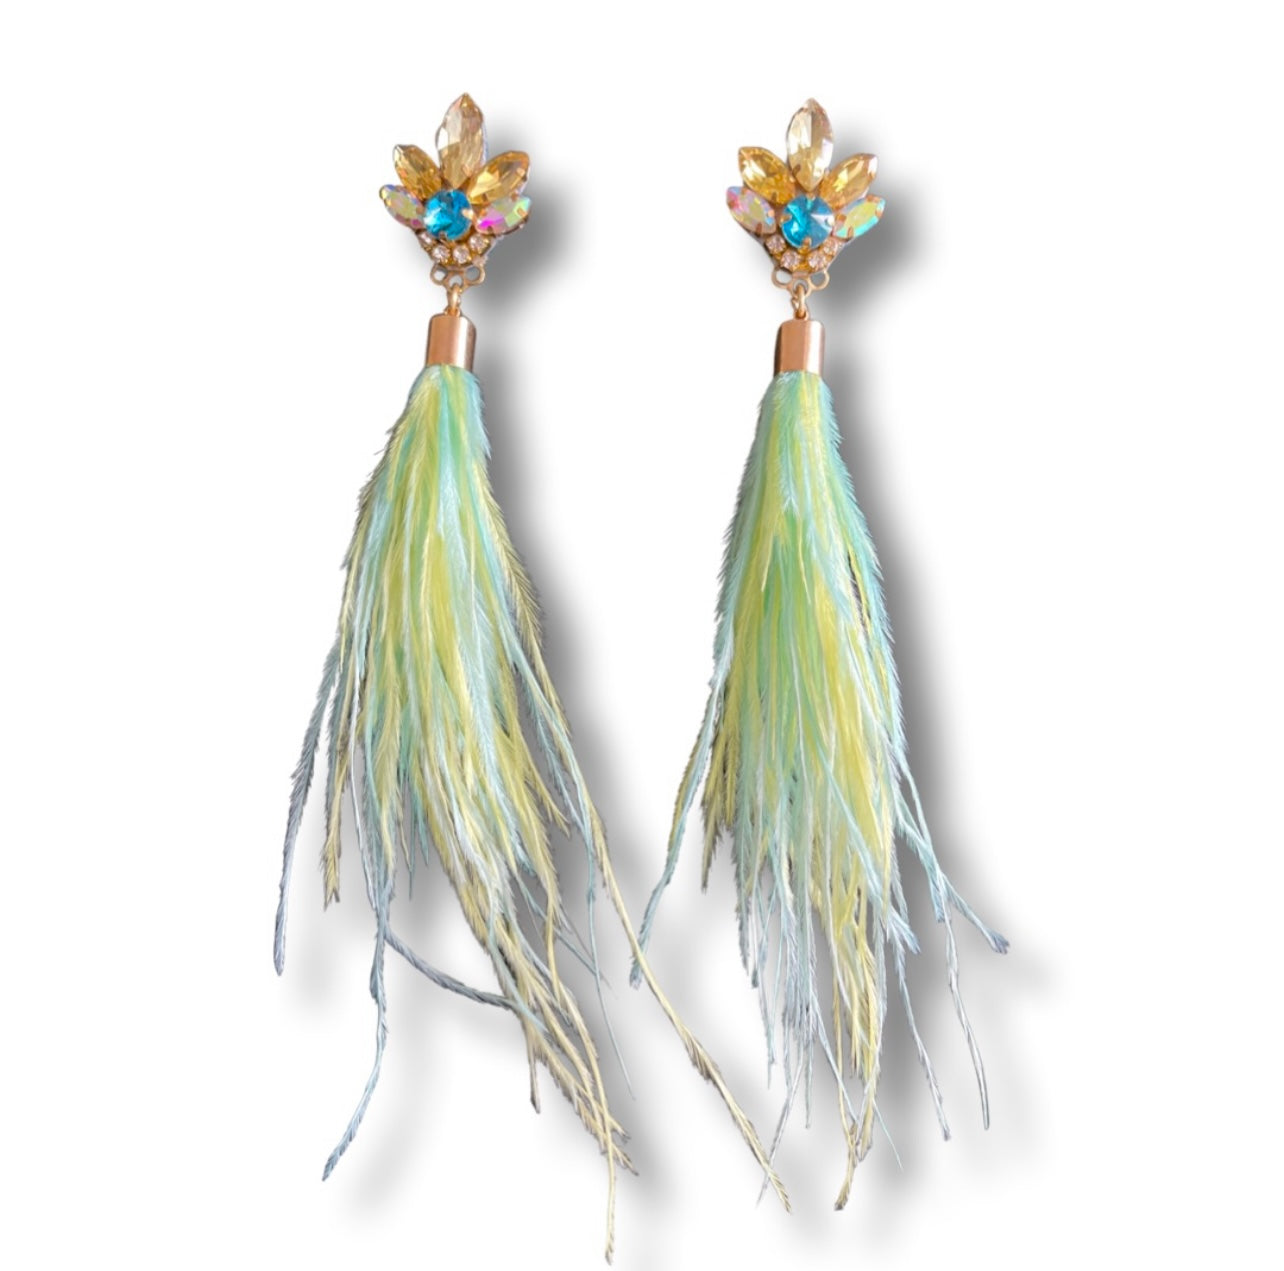 05. Earrings designed in yellow and blue feather